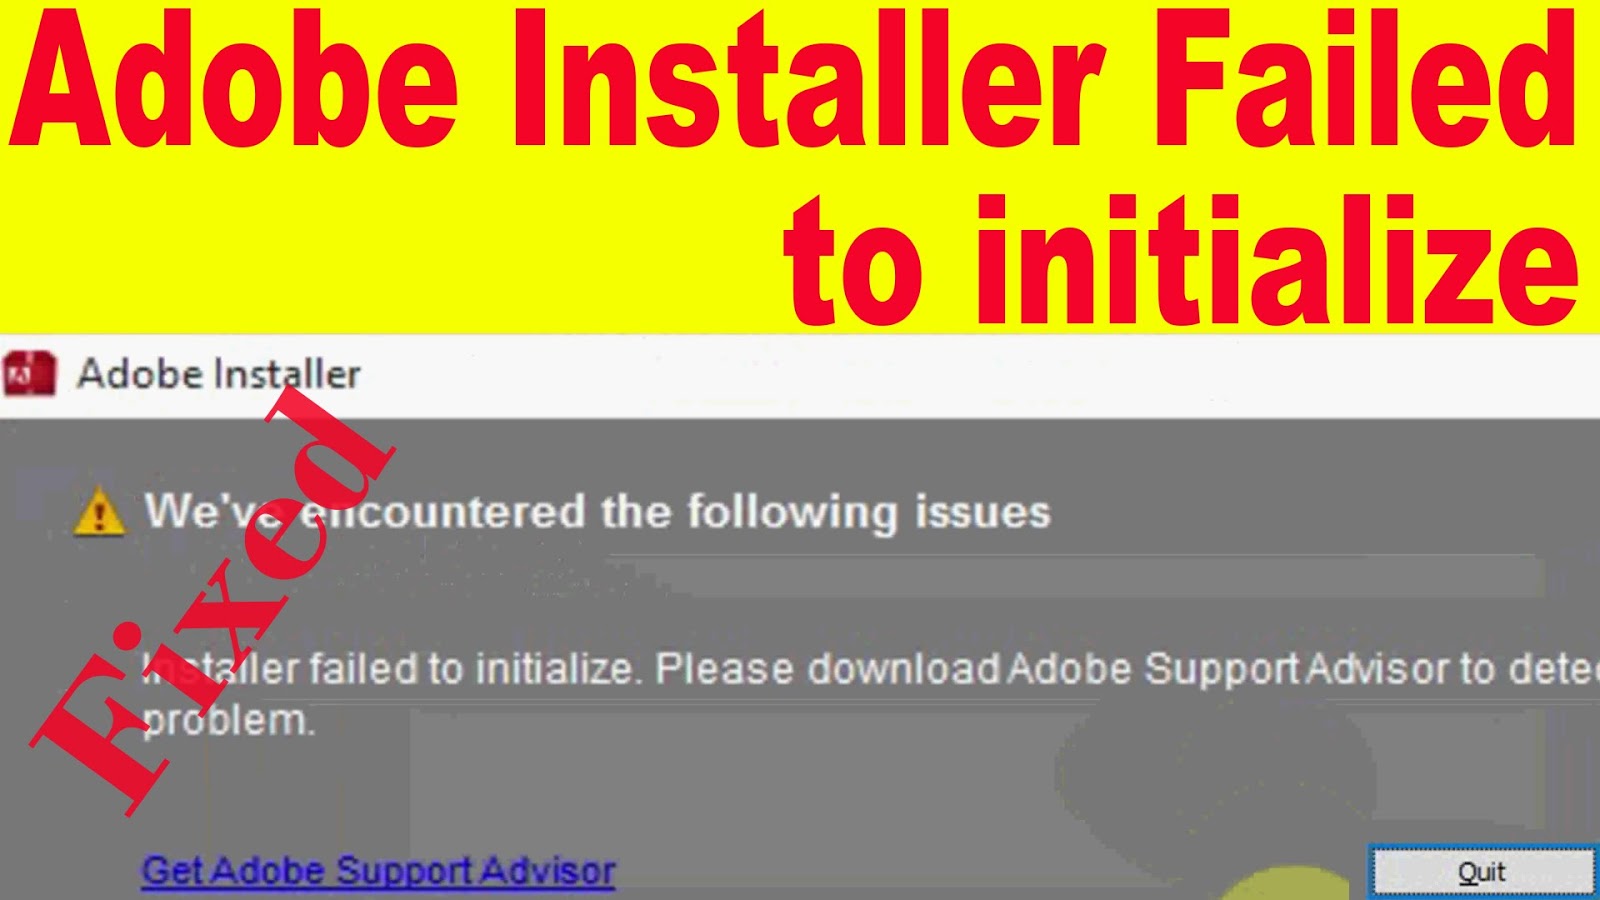 Initialized library failed. SECUROM failed to initialize. Installer initialization failed Oracle. Lets failing install.